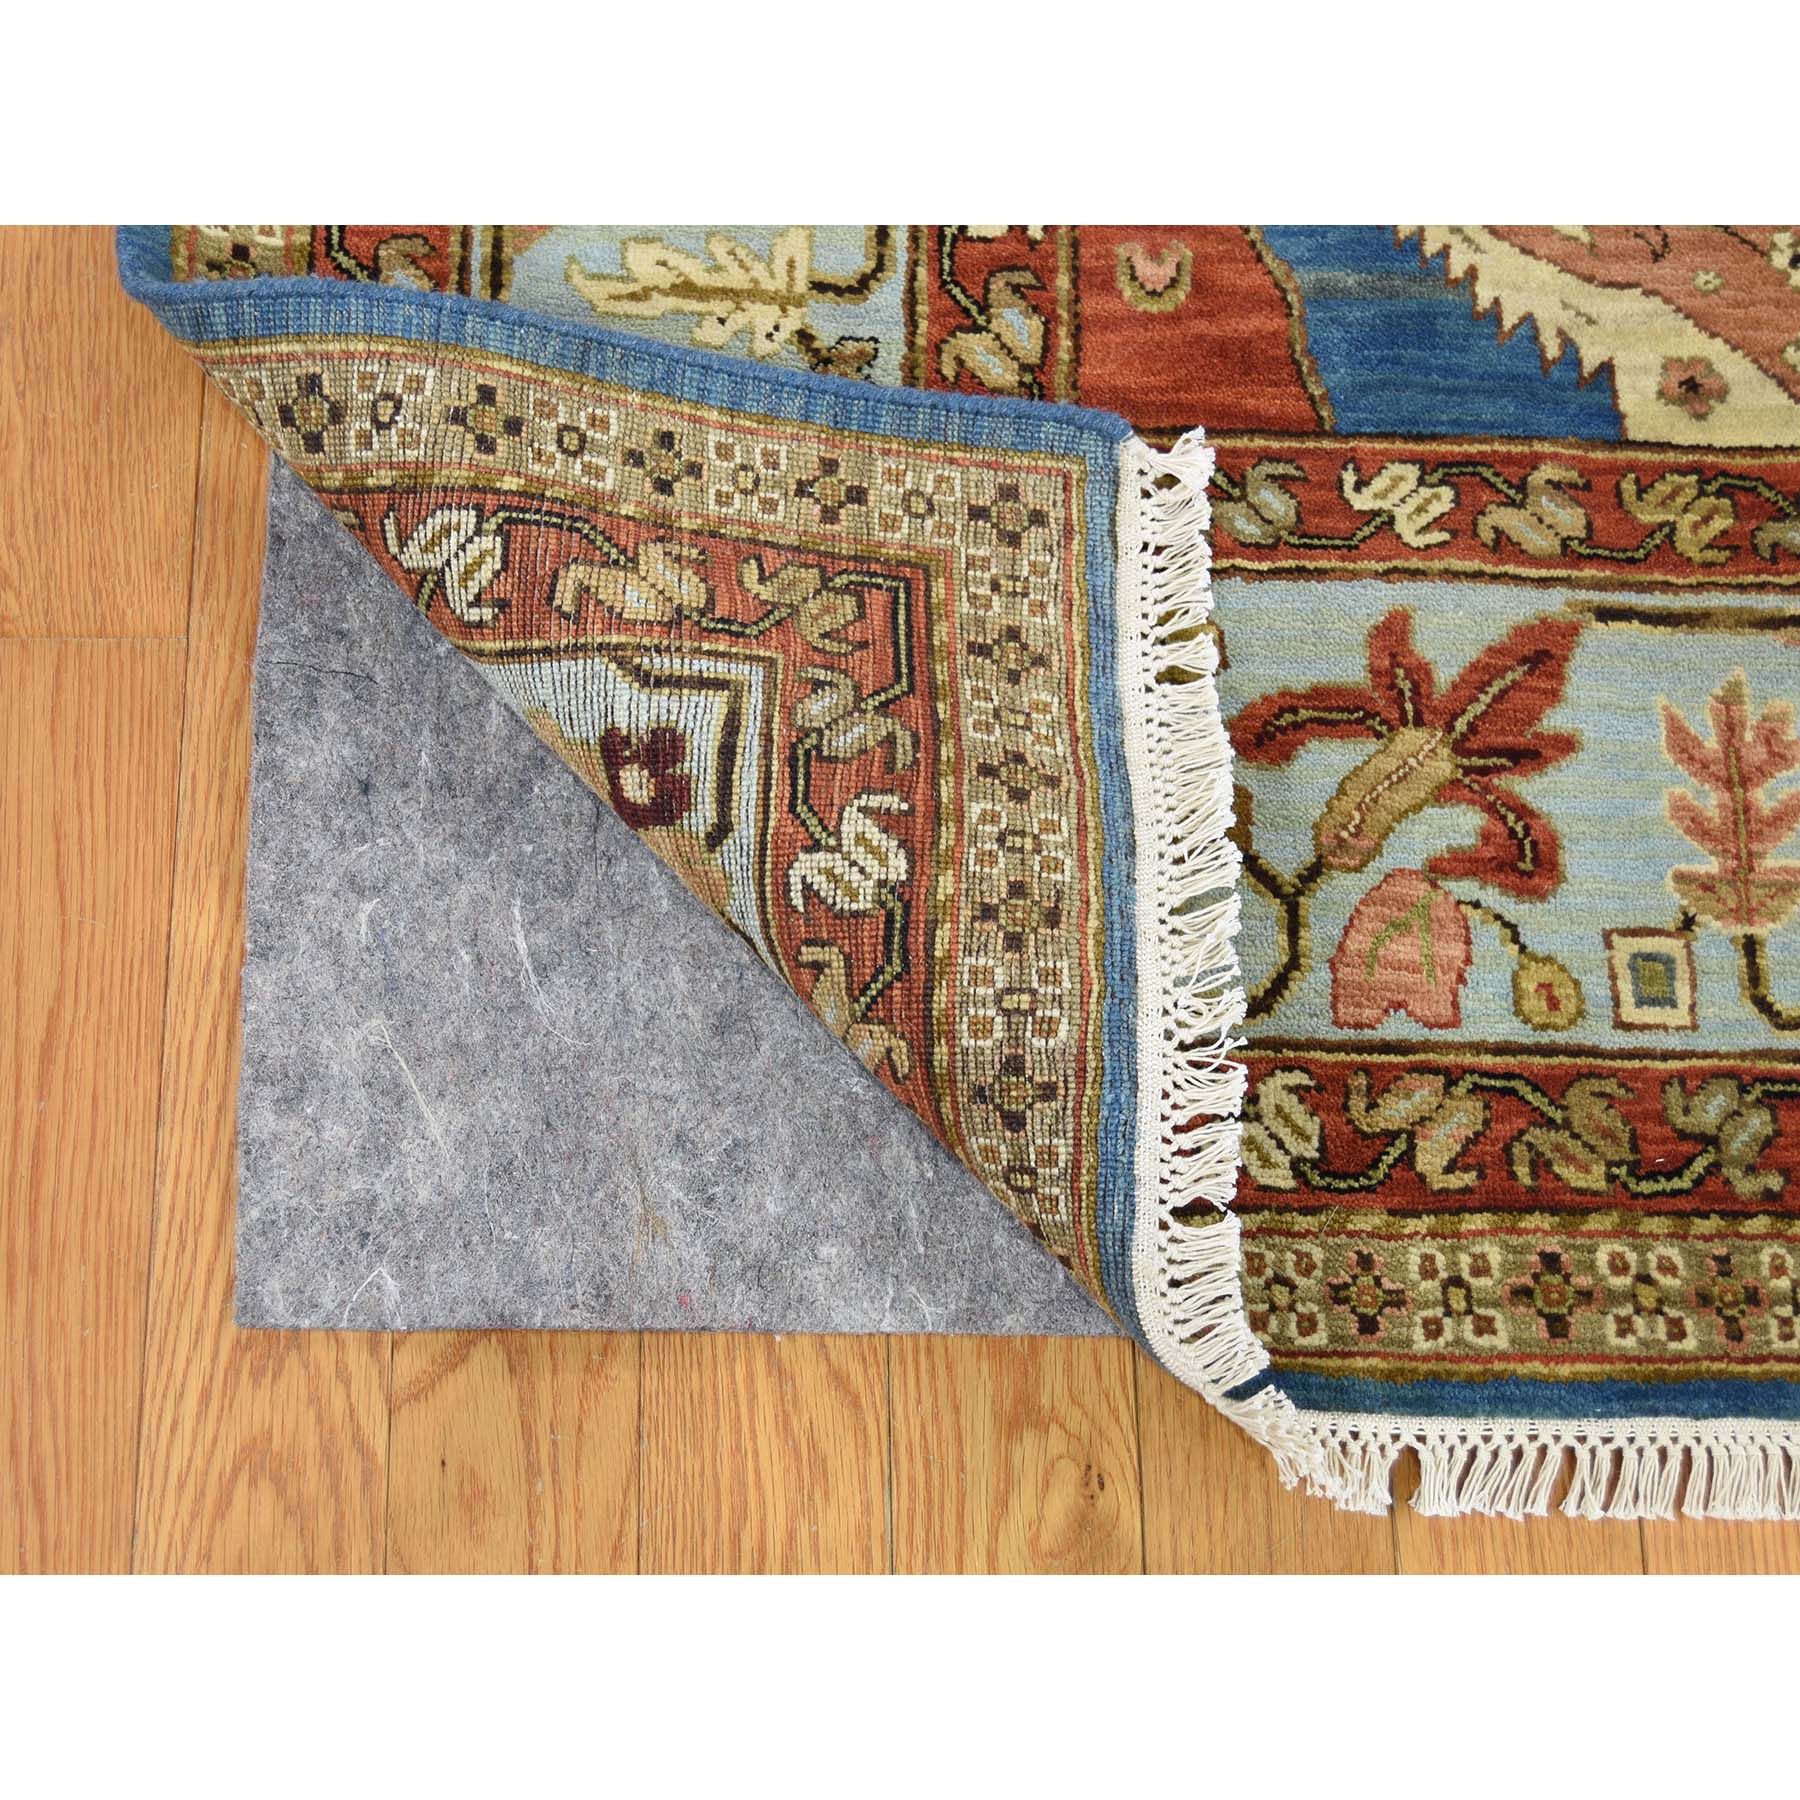 8-10 x12-1  Pure Wool Vegetable Dyes Bakshaish Hand-Knotted Oriental Rug 